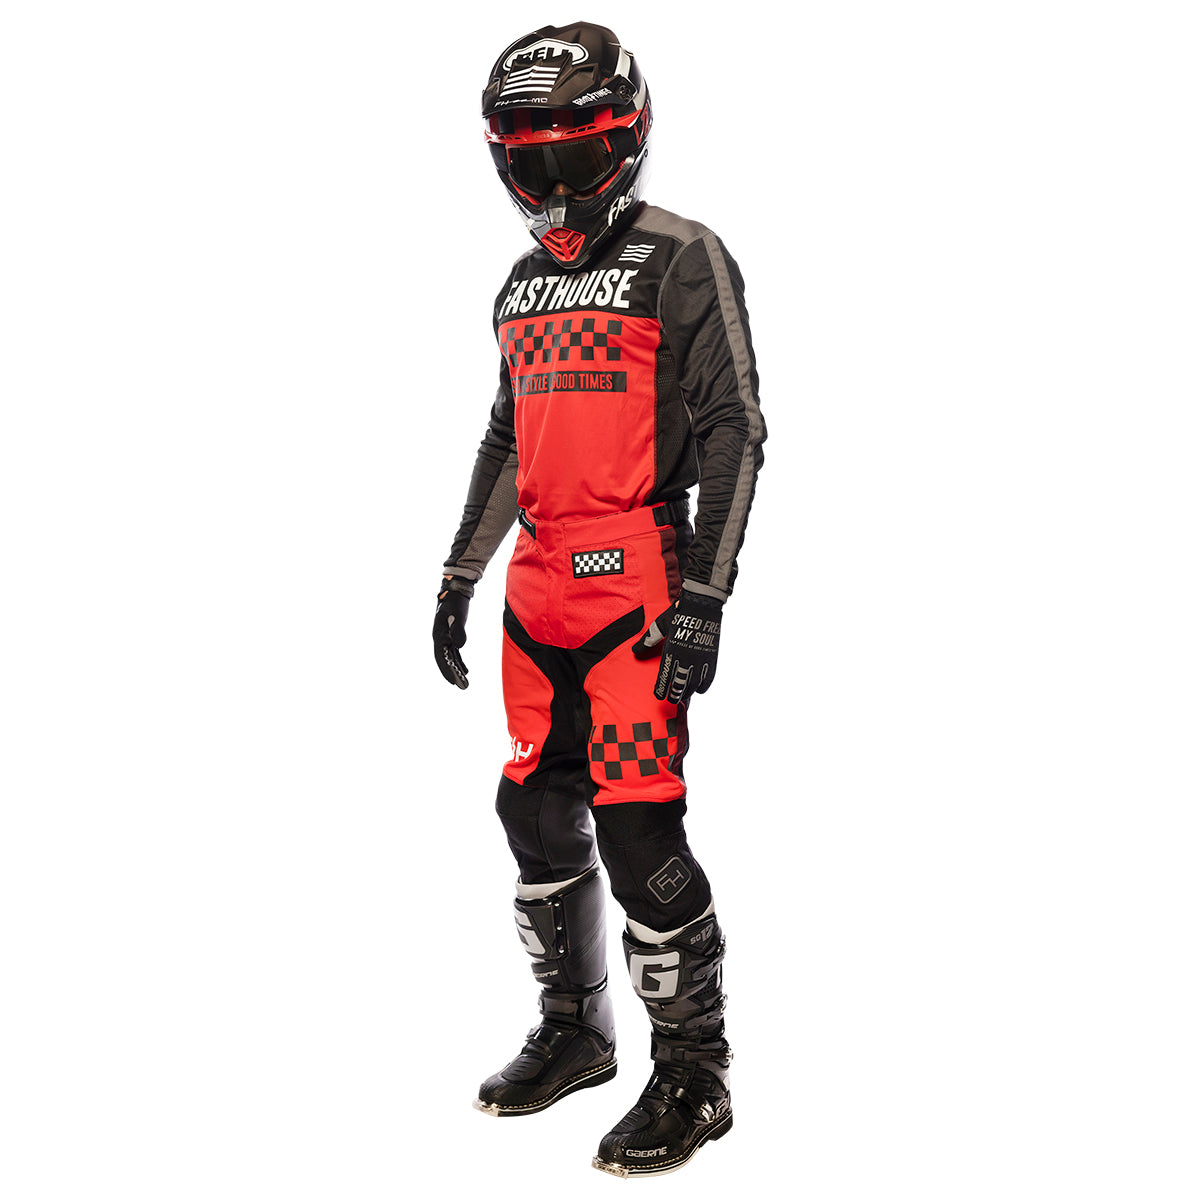 Speed Style Pant - Red/Black